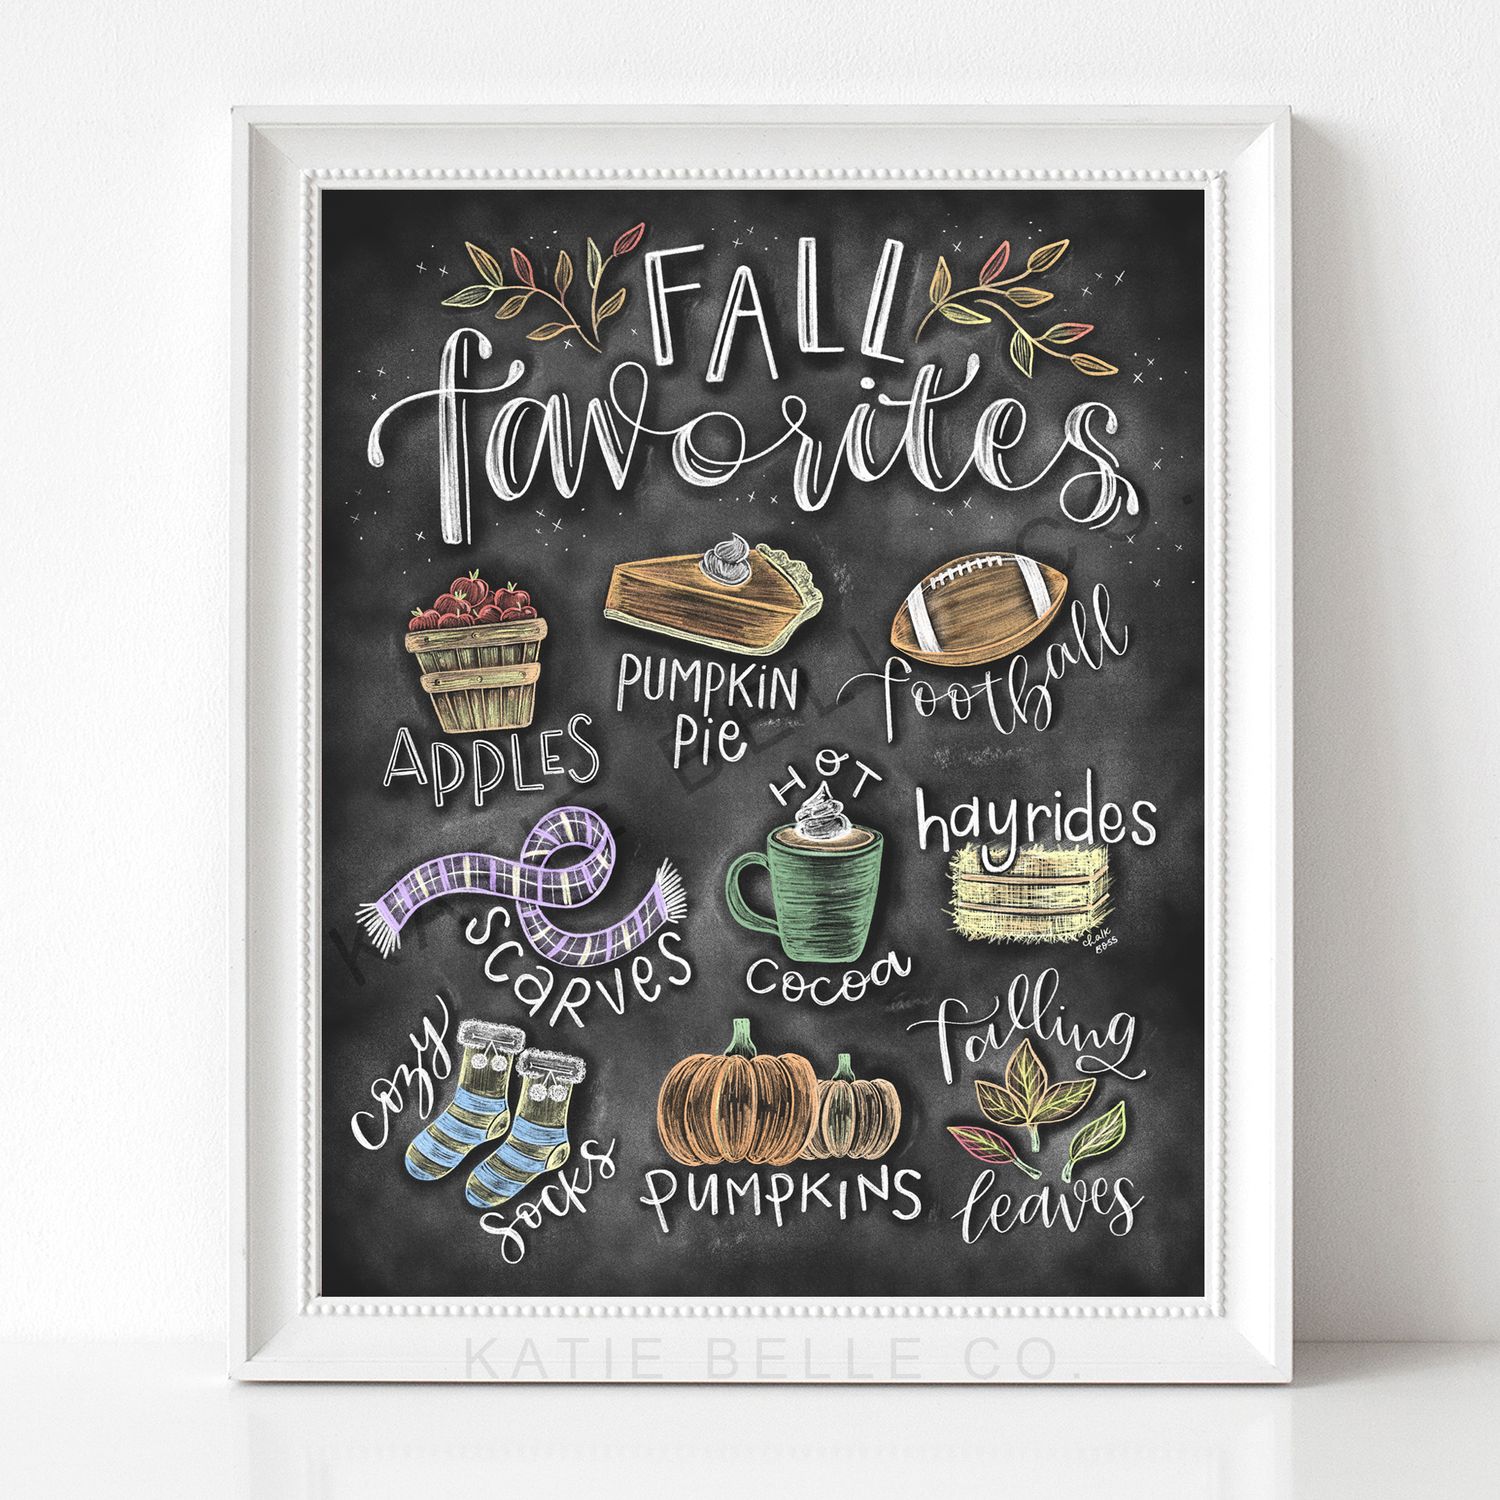 Fall favorites chalkboard print. Fall favorites hand lettered tittle. Fall doodles including apple, pumpkin pie, football, scarves, hot cocoa. hayrides, cozy socks, pumpkins, falling leaves. Fall decor. Chalk Art. Frame not included. Hand drawn by Katie Belle Co. 